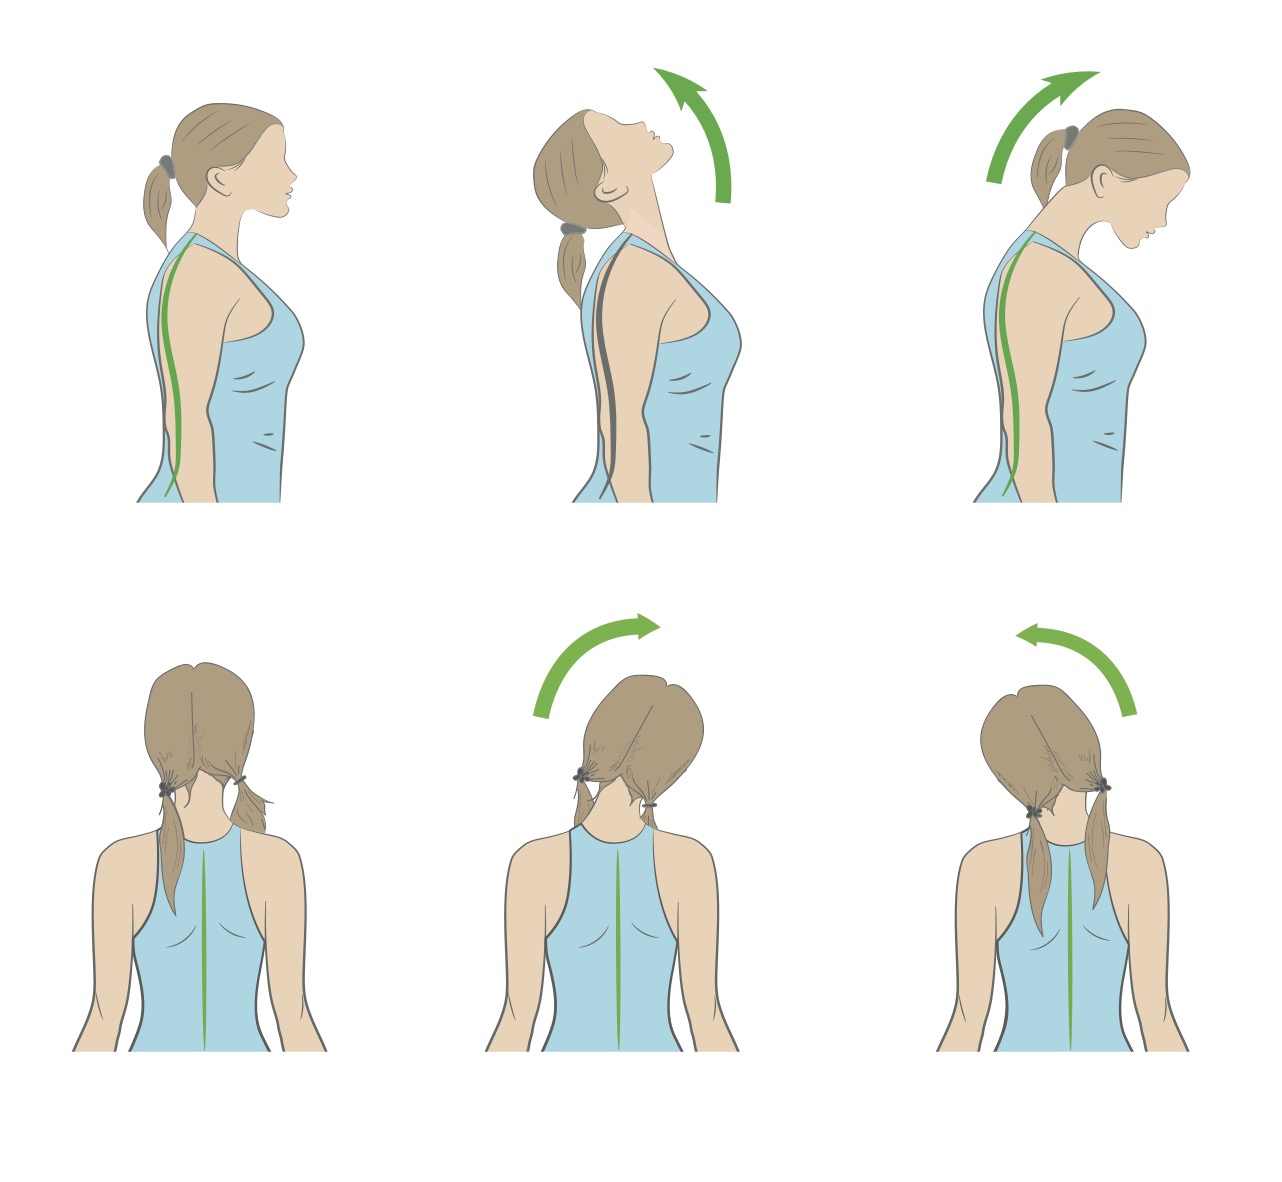 Pinched Nerve in Neck: Causes, Symptoms, and Treatments